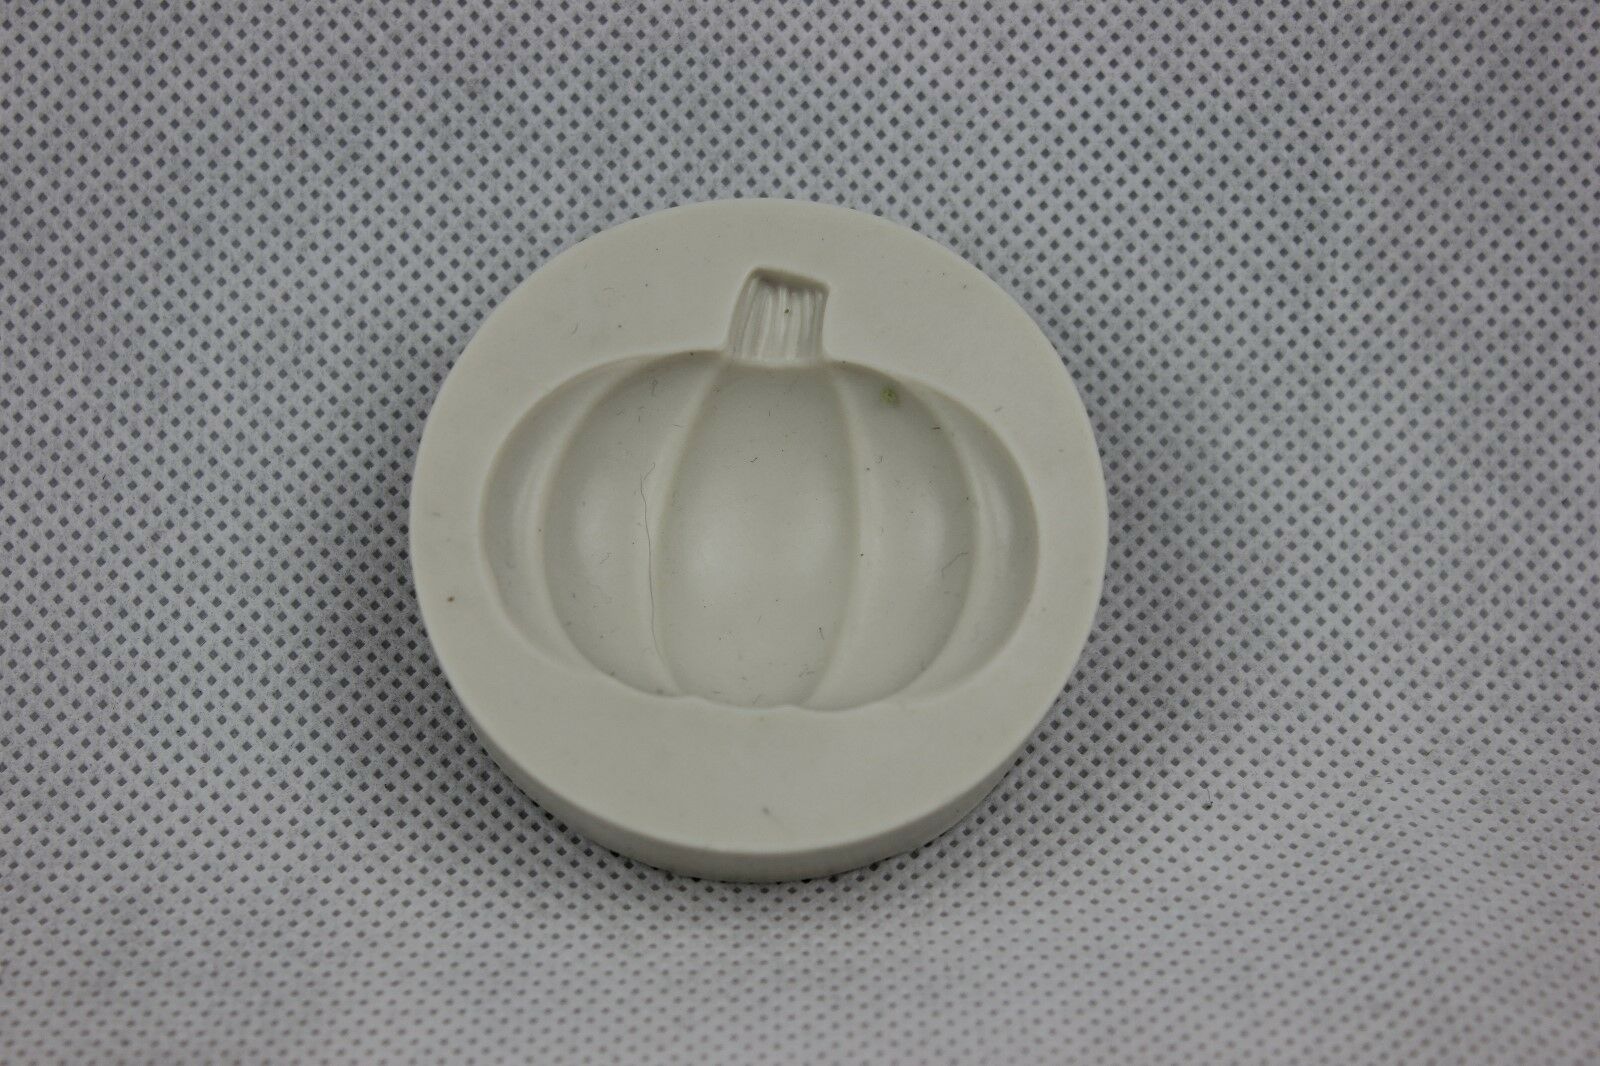 attachment-https://www.cupcakeaddicts.co.uk/wp-content/uploads/imported/2/Pumpkin-Halloween-Silicone-Mould-Cake-Decorating-Fondant-Icing-Resin-Crafts-322622766992-4.jpg